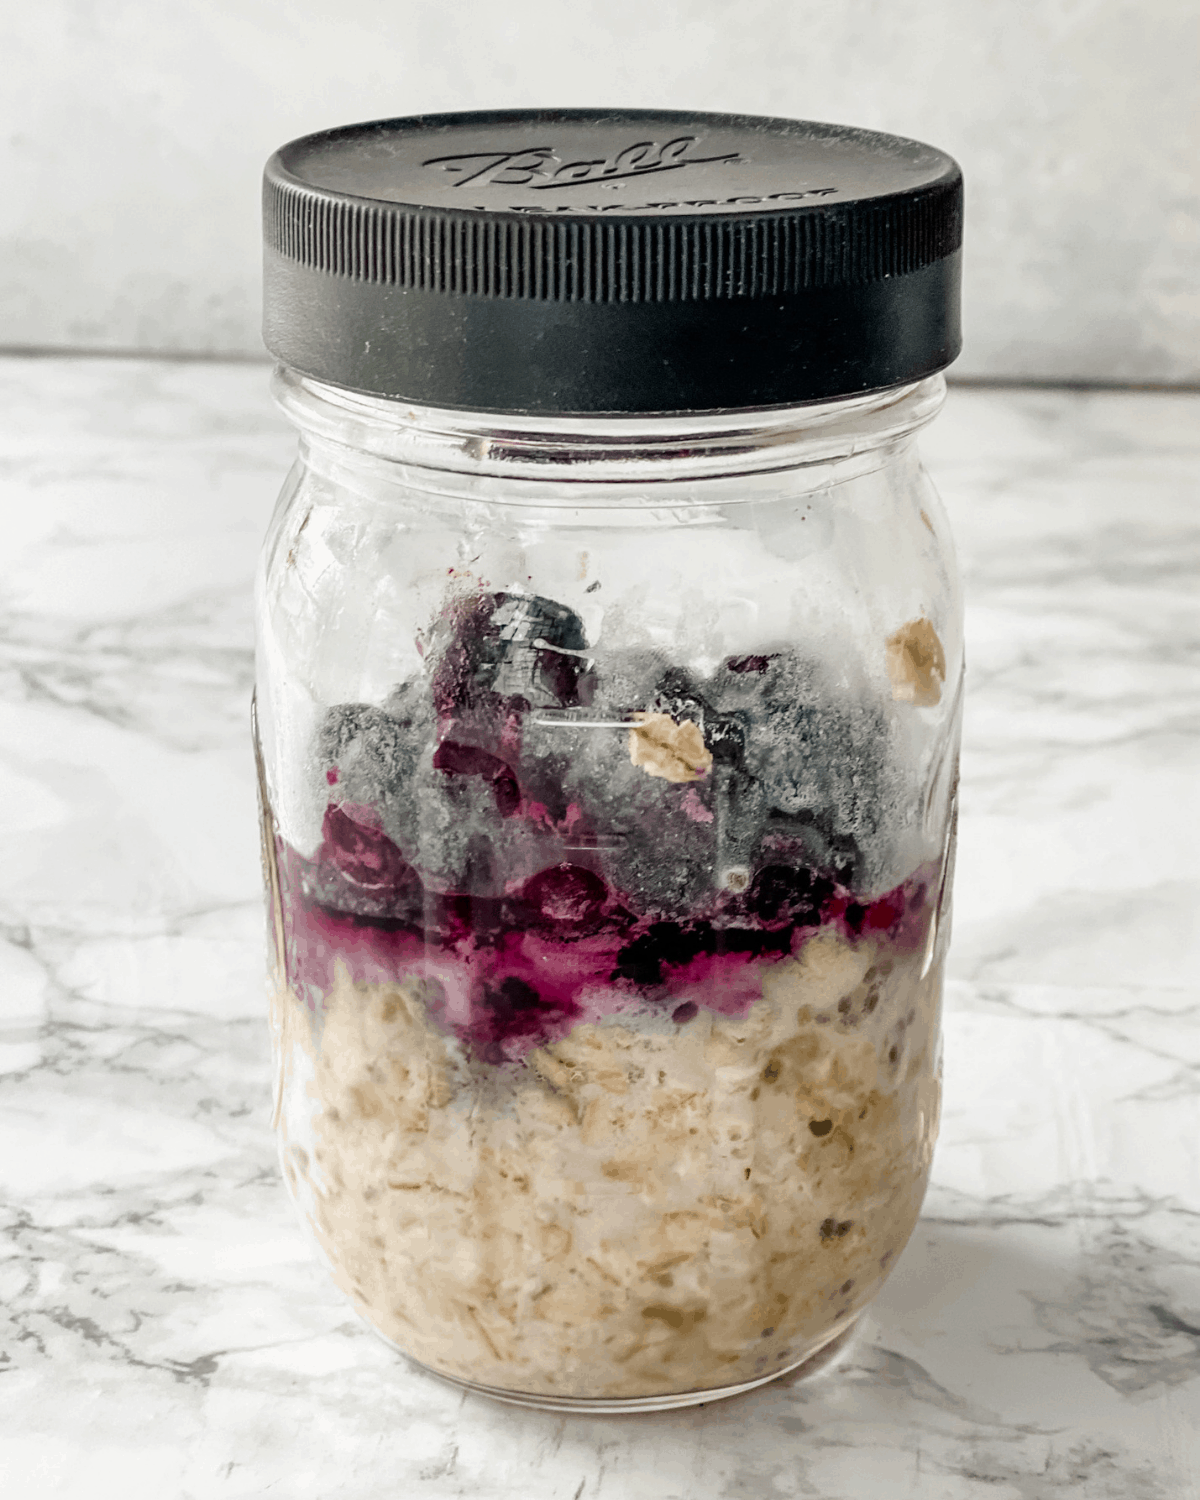 All ingredients for overnight oats, blueberries and bananas in a jar.